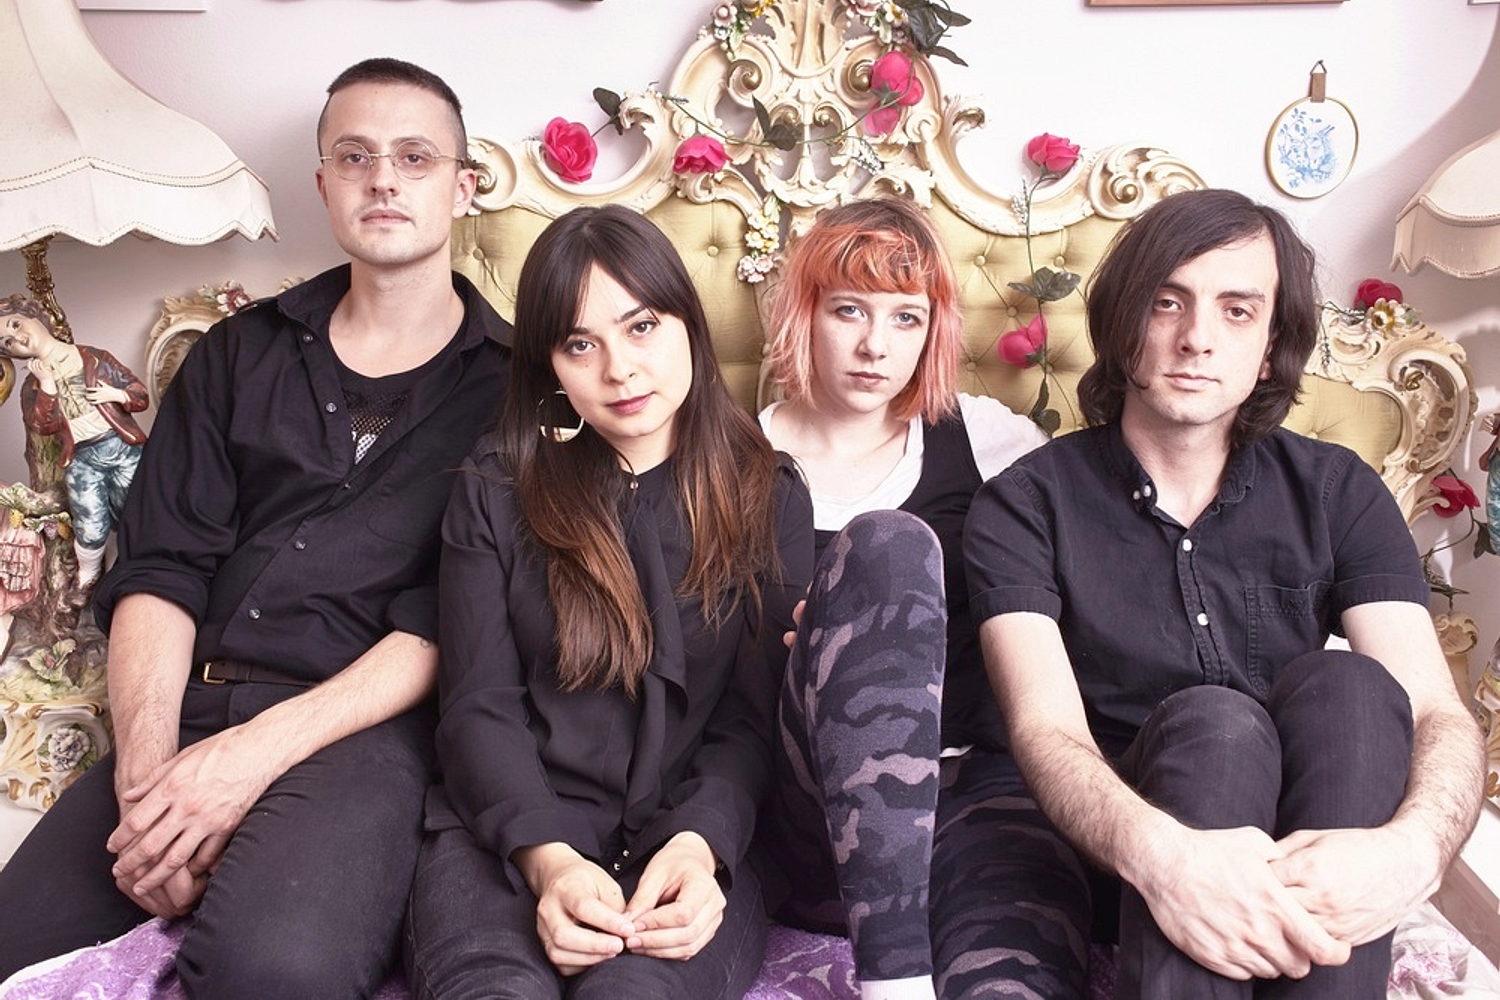 Dilly Dally stream debut album ‘Sore’ with vintage video game